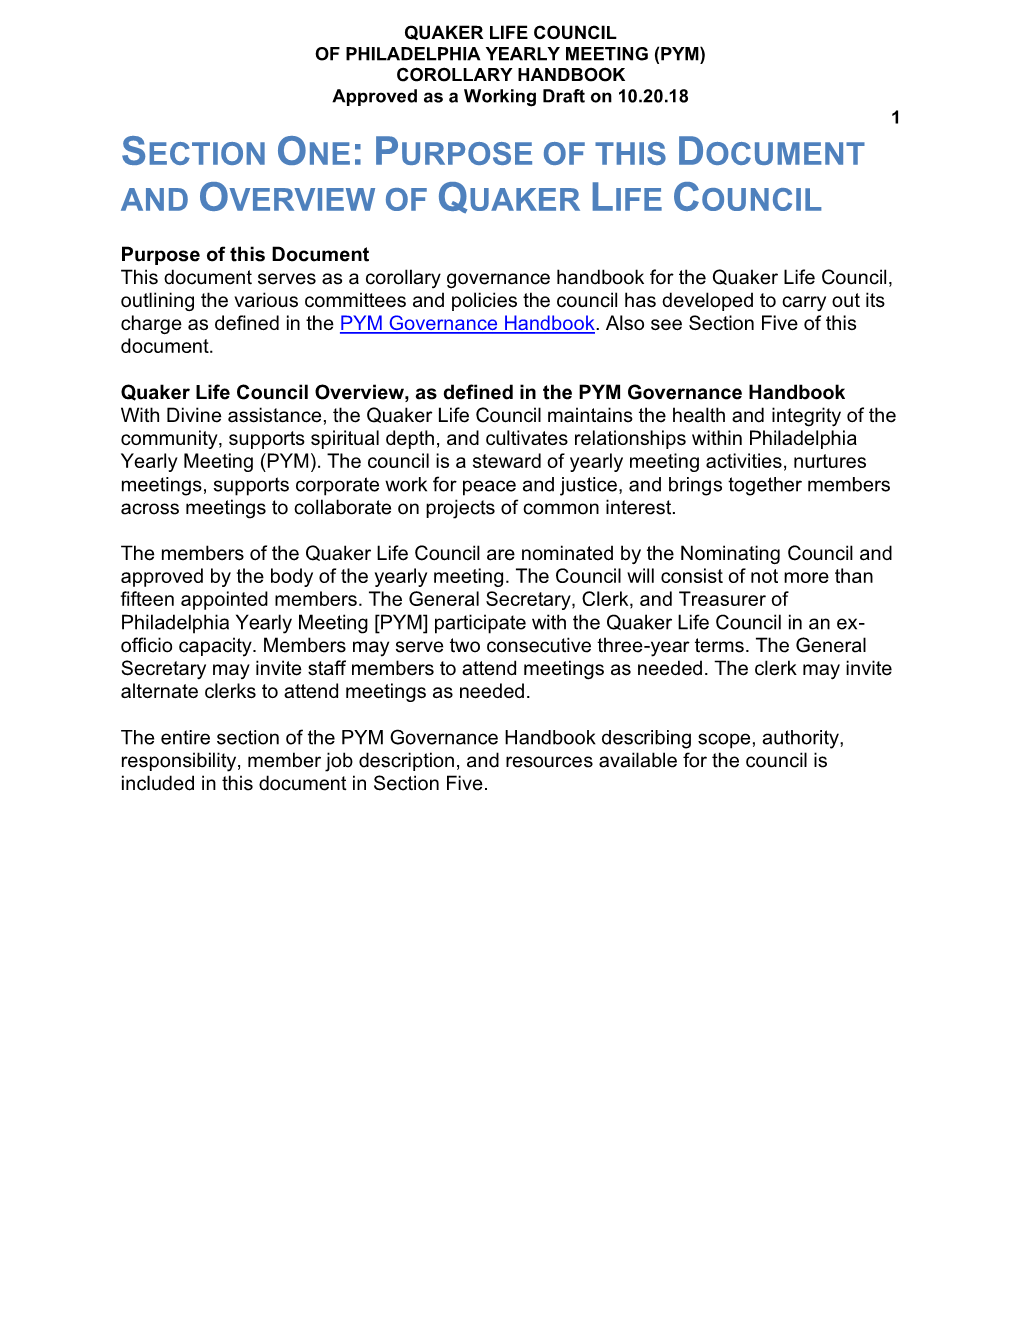 Section One: Purpose of This Document and Overview of Quaker Life Council